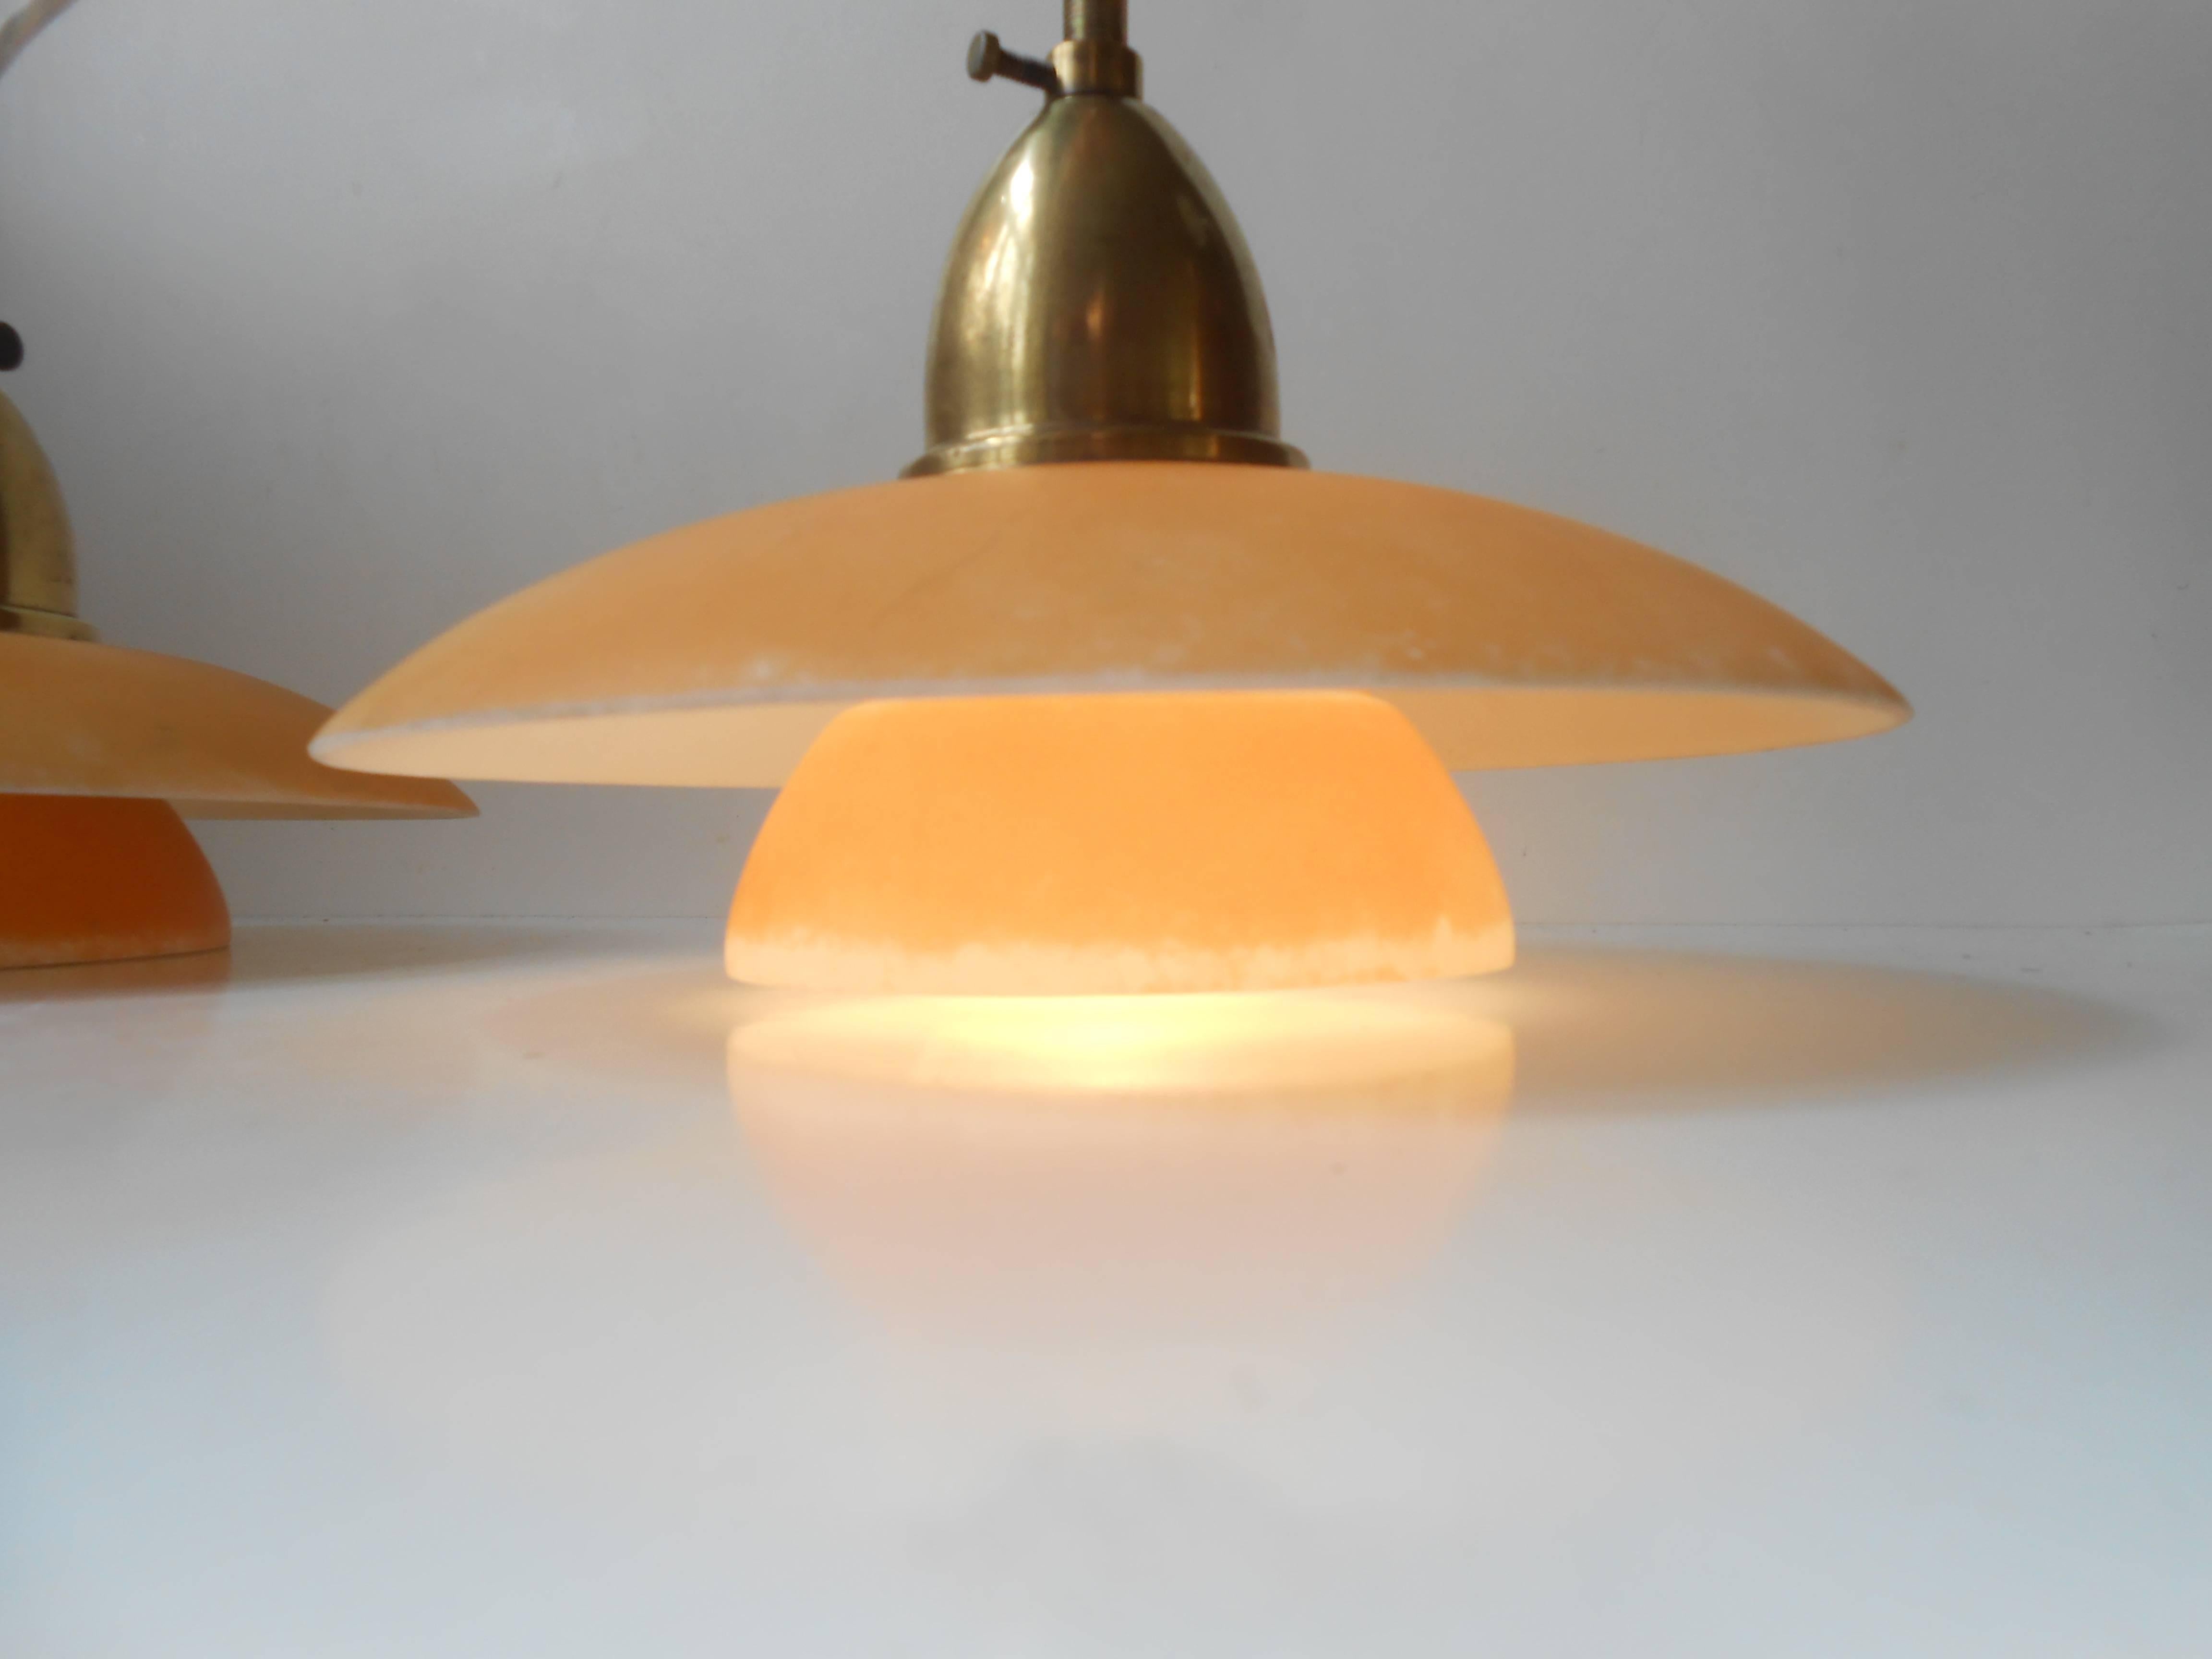 Very early and delicately constructed pair of single layered dusty yellow glass and brass pendant lamps by Lyfa, Denmark, circa 1930. Very close resemblance the early designs of Poul Henningsen. These have been electrically restored with new wires